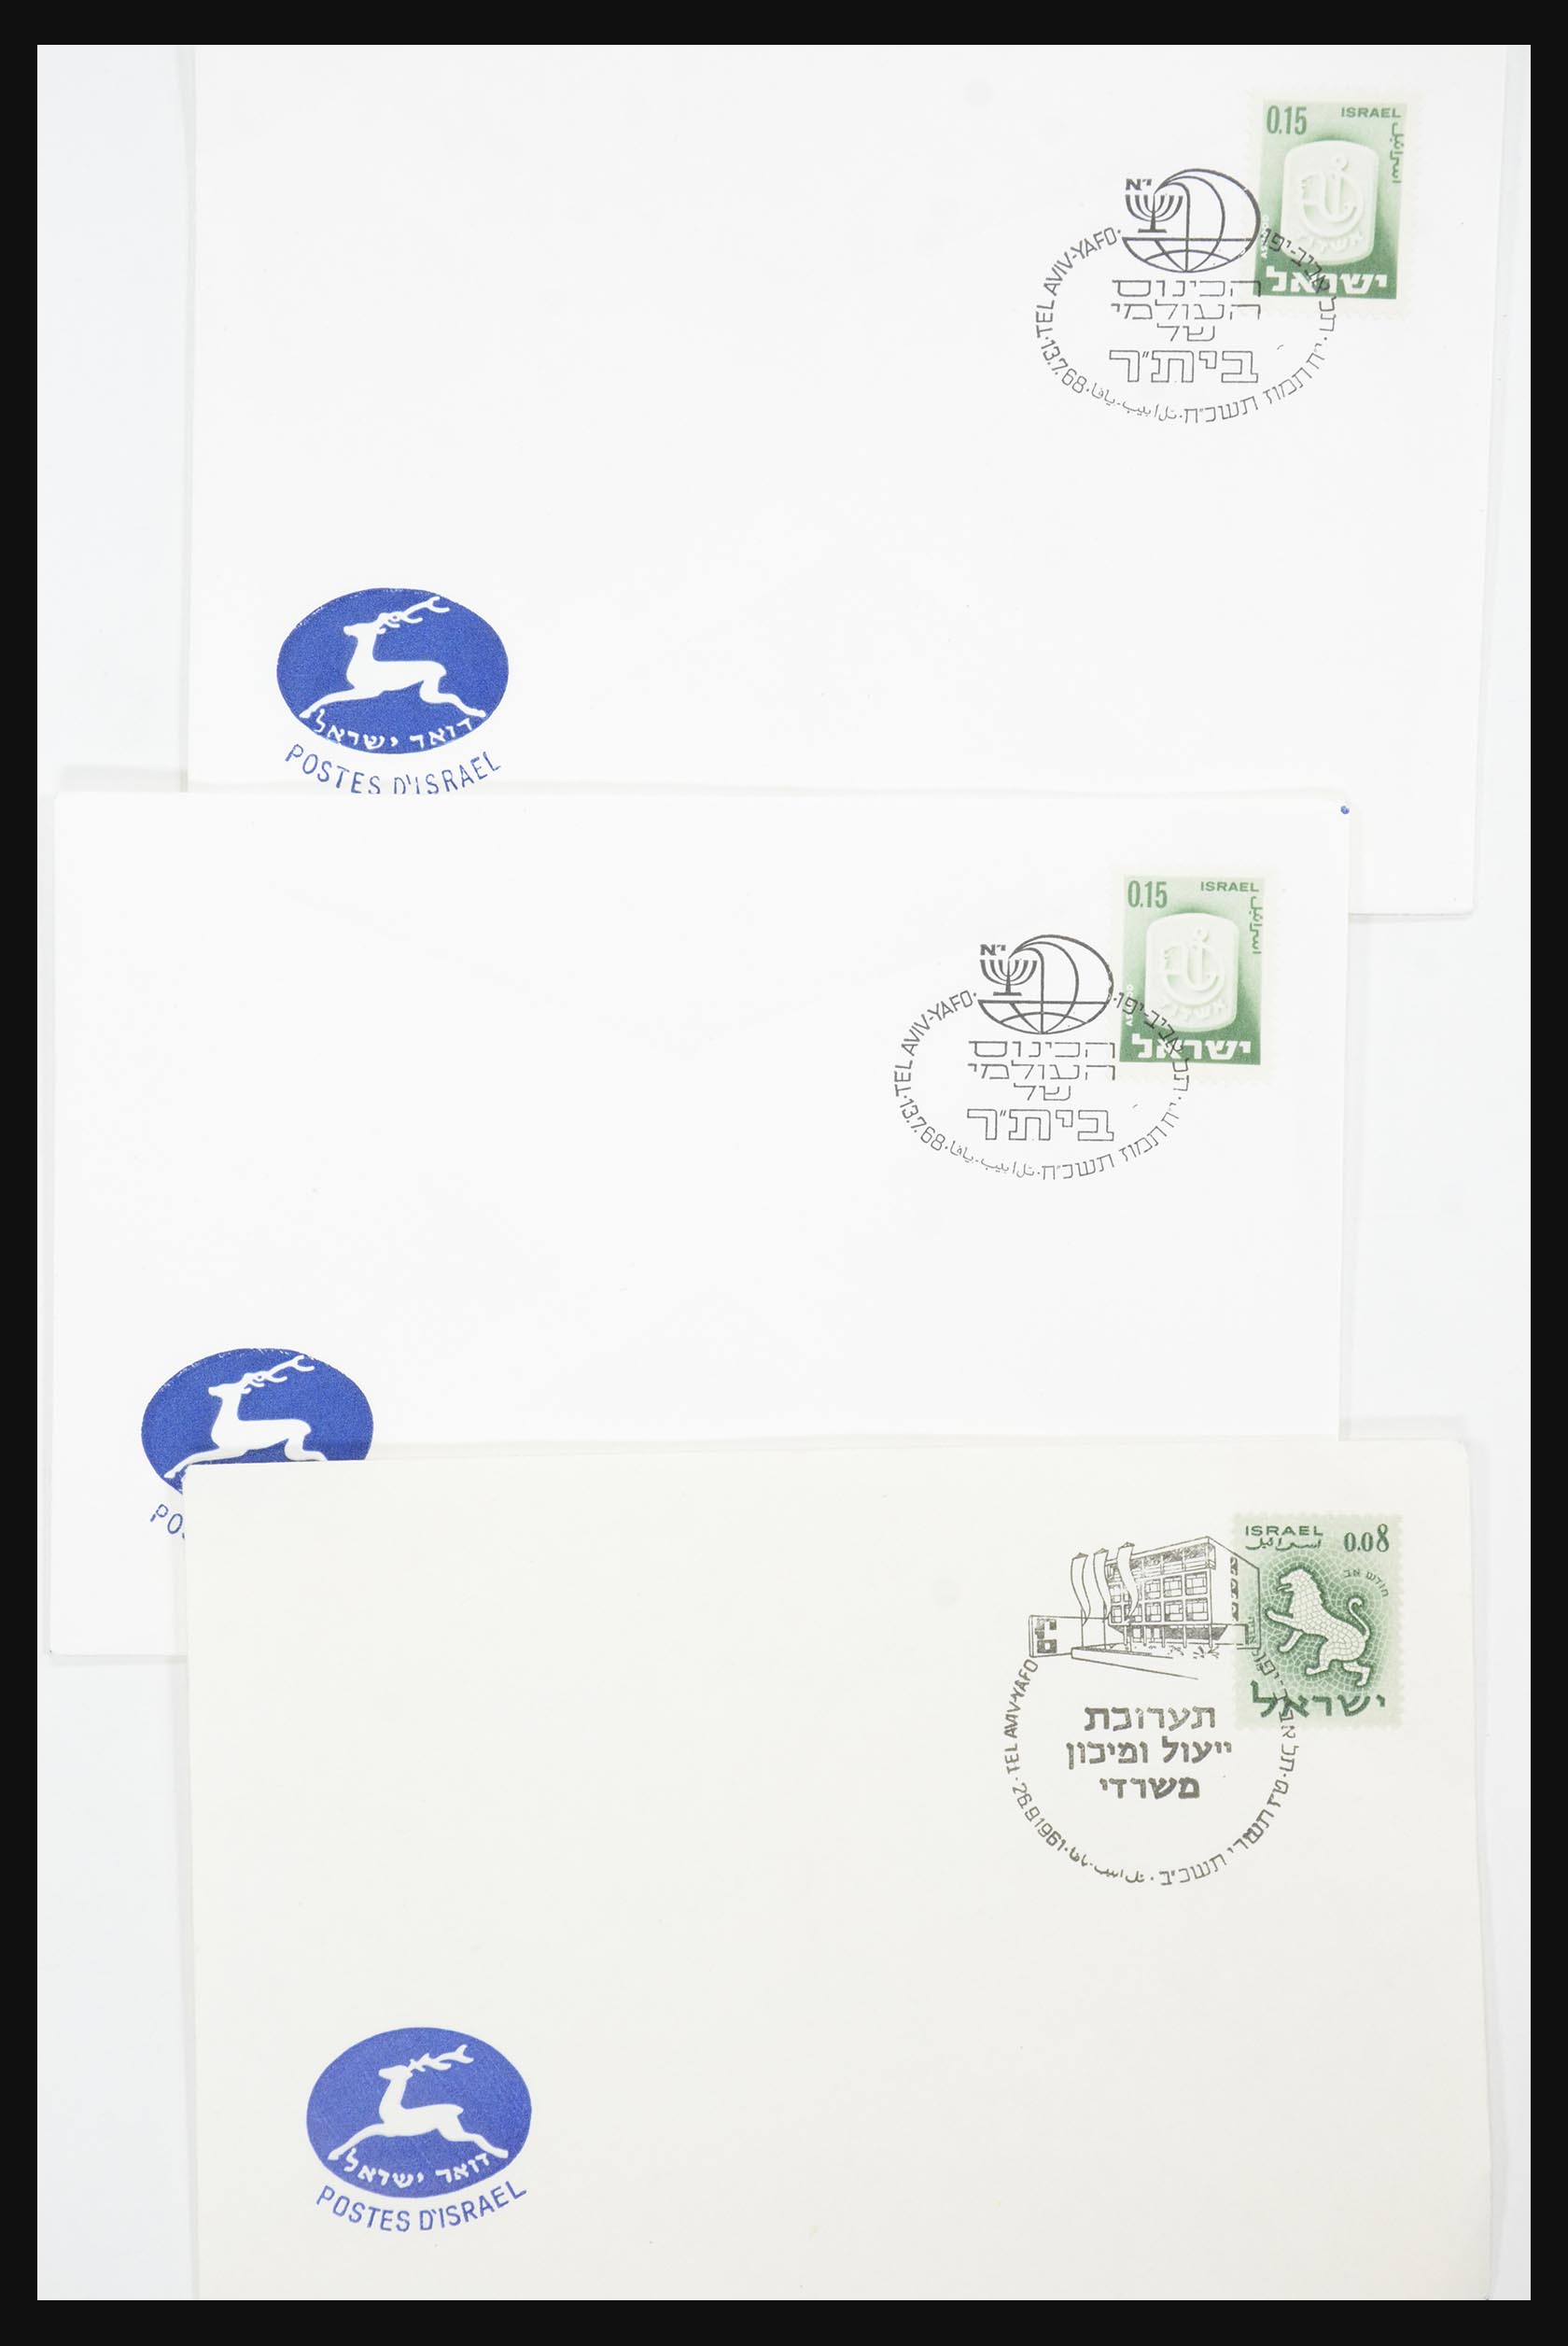 31924 025 - 31924 Israel first day cover collection 1957-2003.